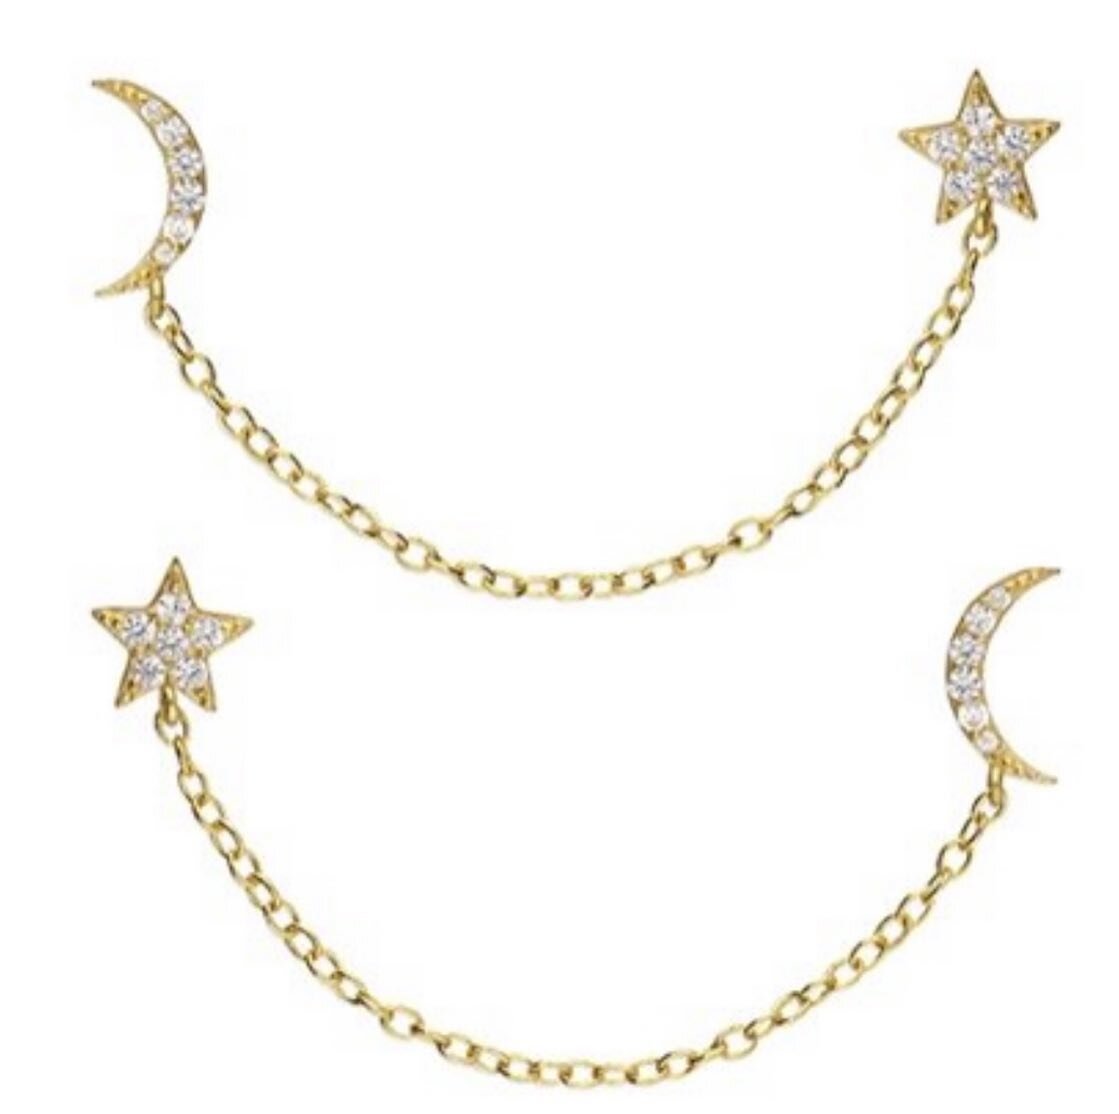 💫 NEW IN: Moon and Star Linking Chain Earrings
⭐️ Wear one or as a pair.
👉 Swipe to see me wearing them - so light and easy - you must have a double piercing.
🛍 Sold as a single or as a pair if you prefer. 
.
.
.
#affordable #moon #star #linking #